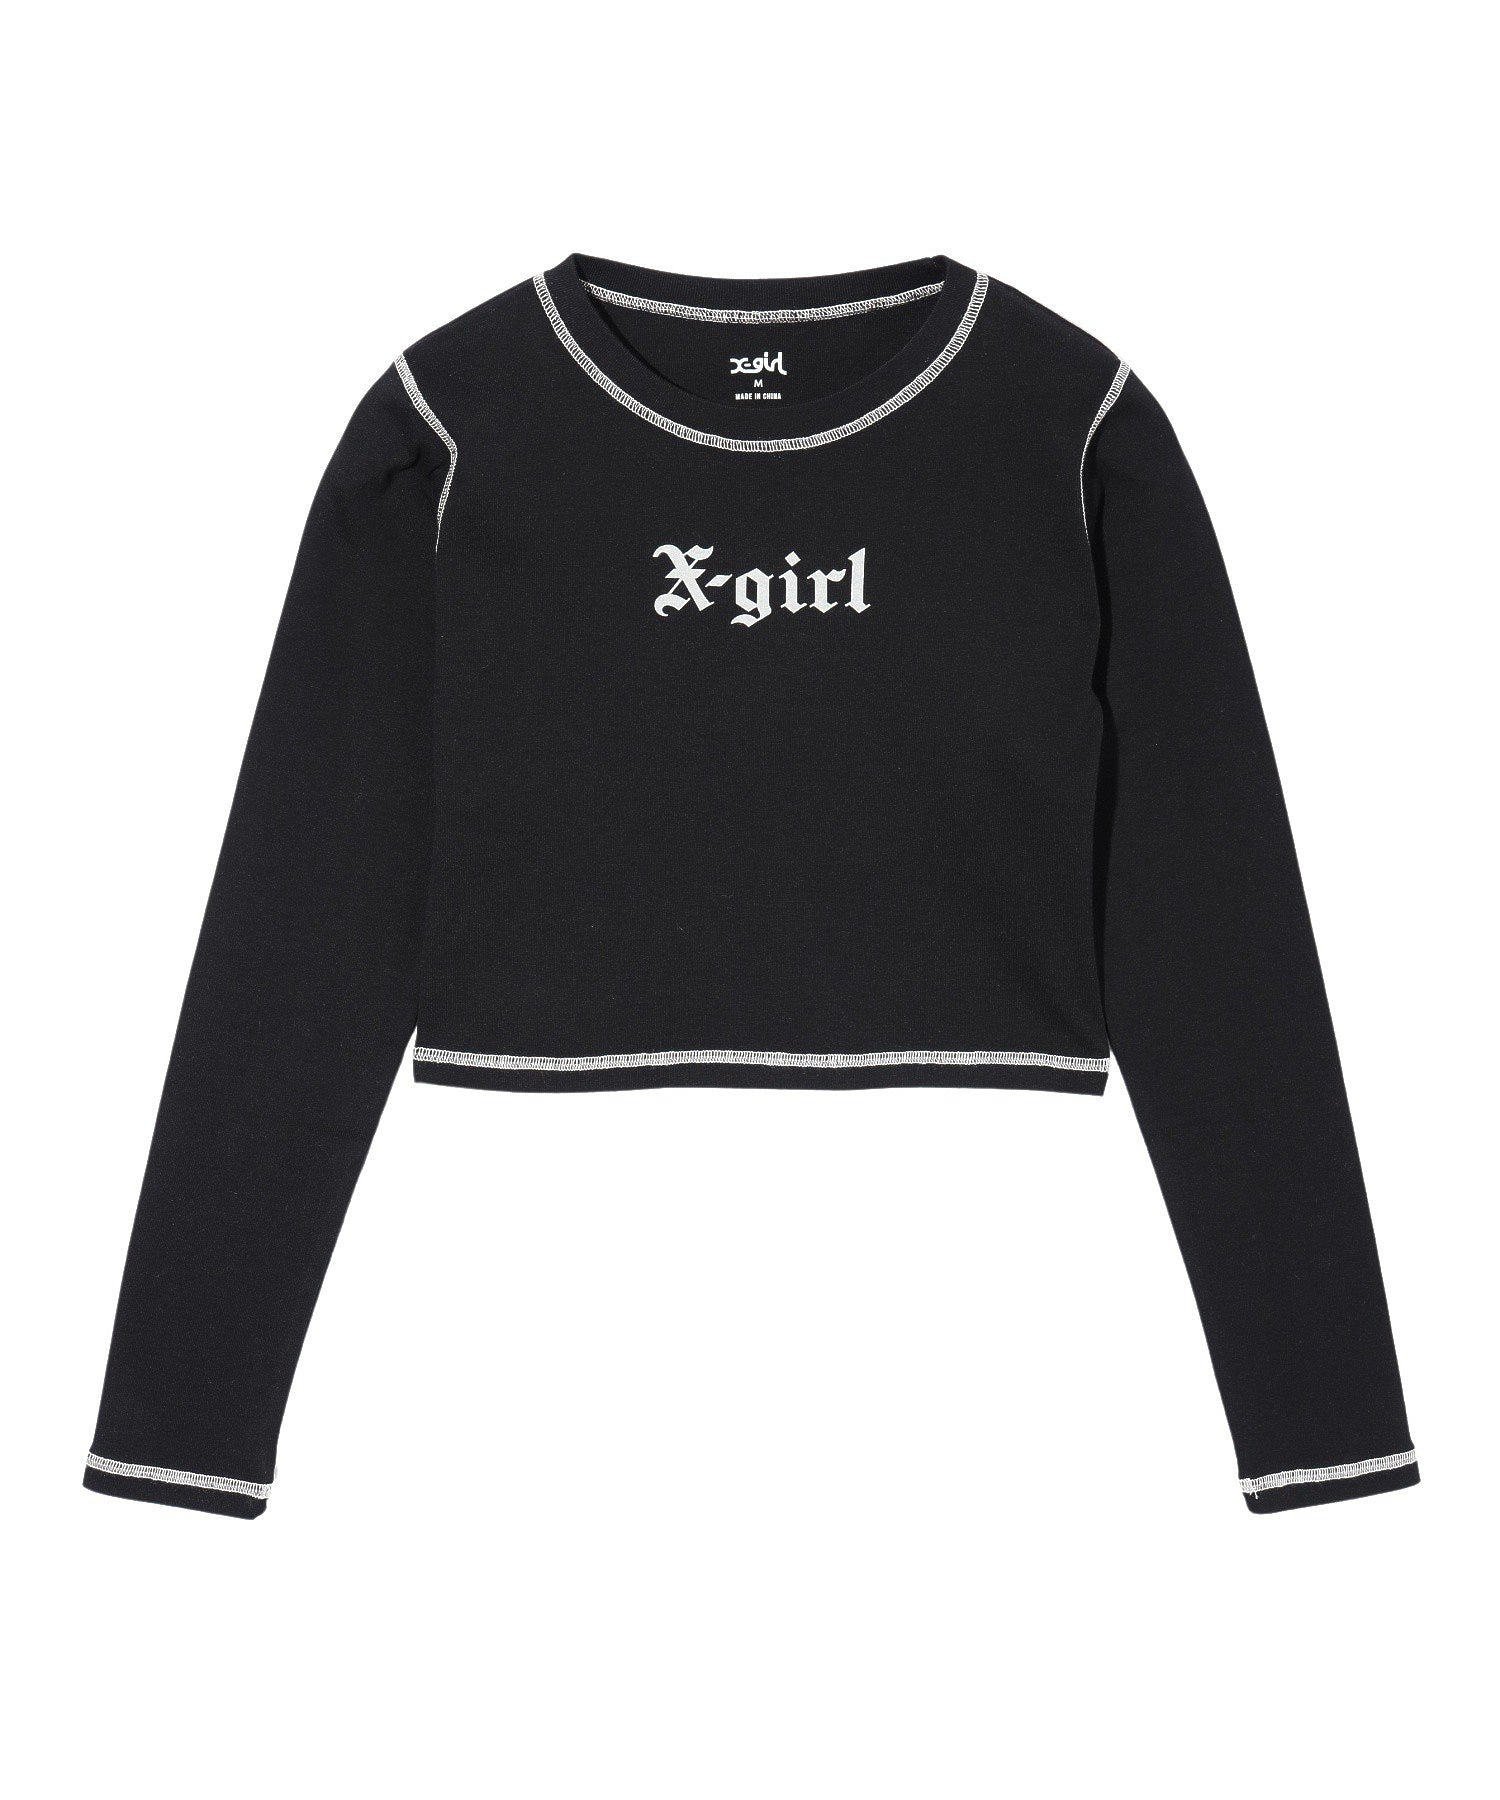 OLD ENGLISH L/S BABY TEE